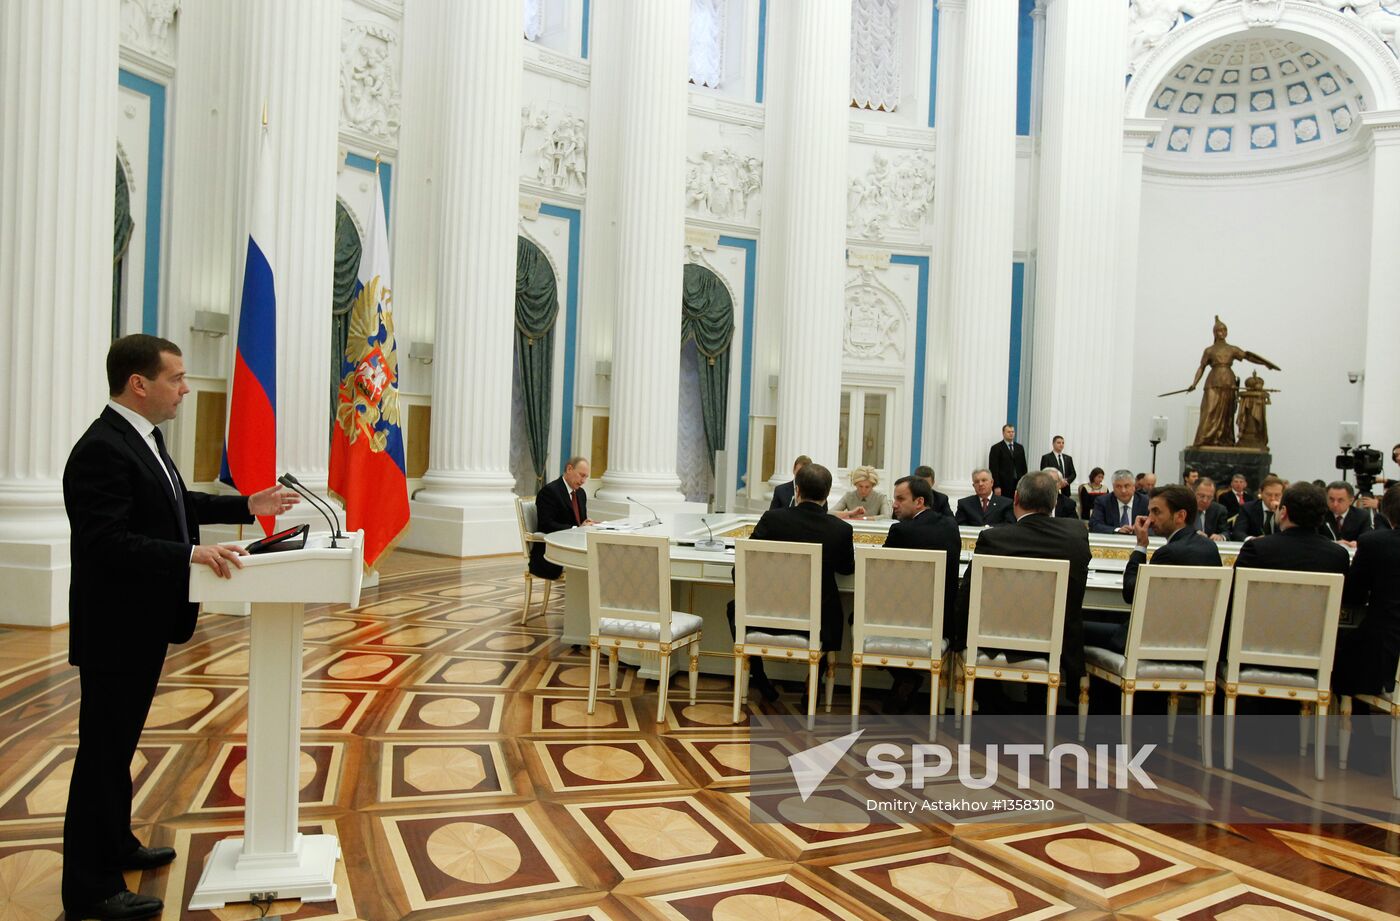 Russian Government holds expanded format meeting in the Kremlin